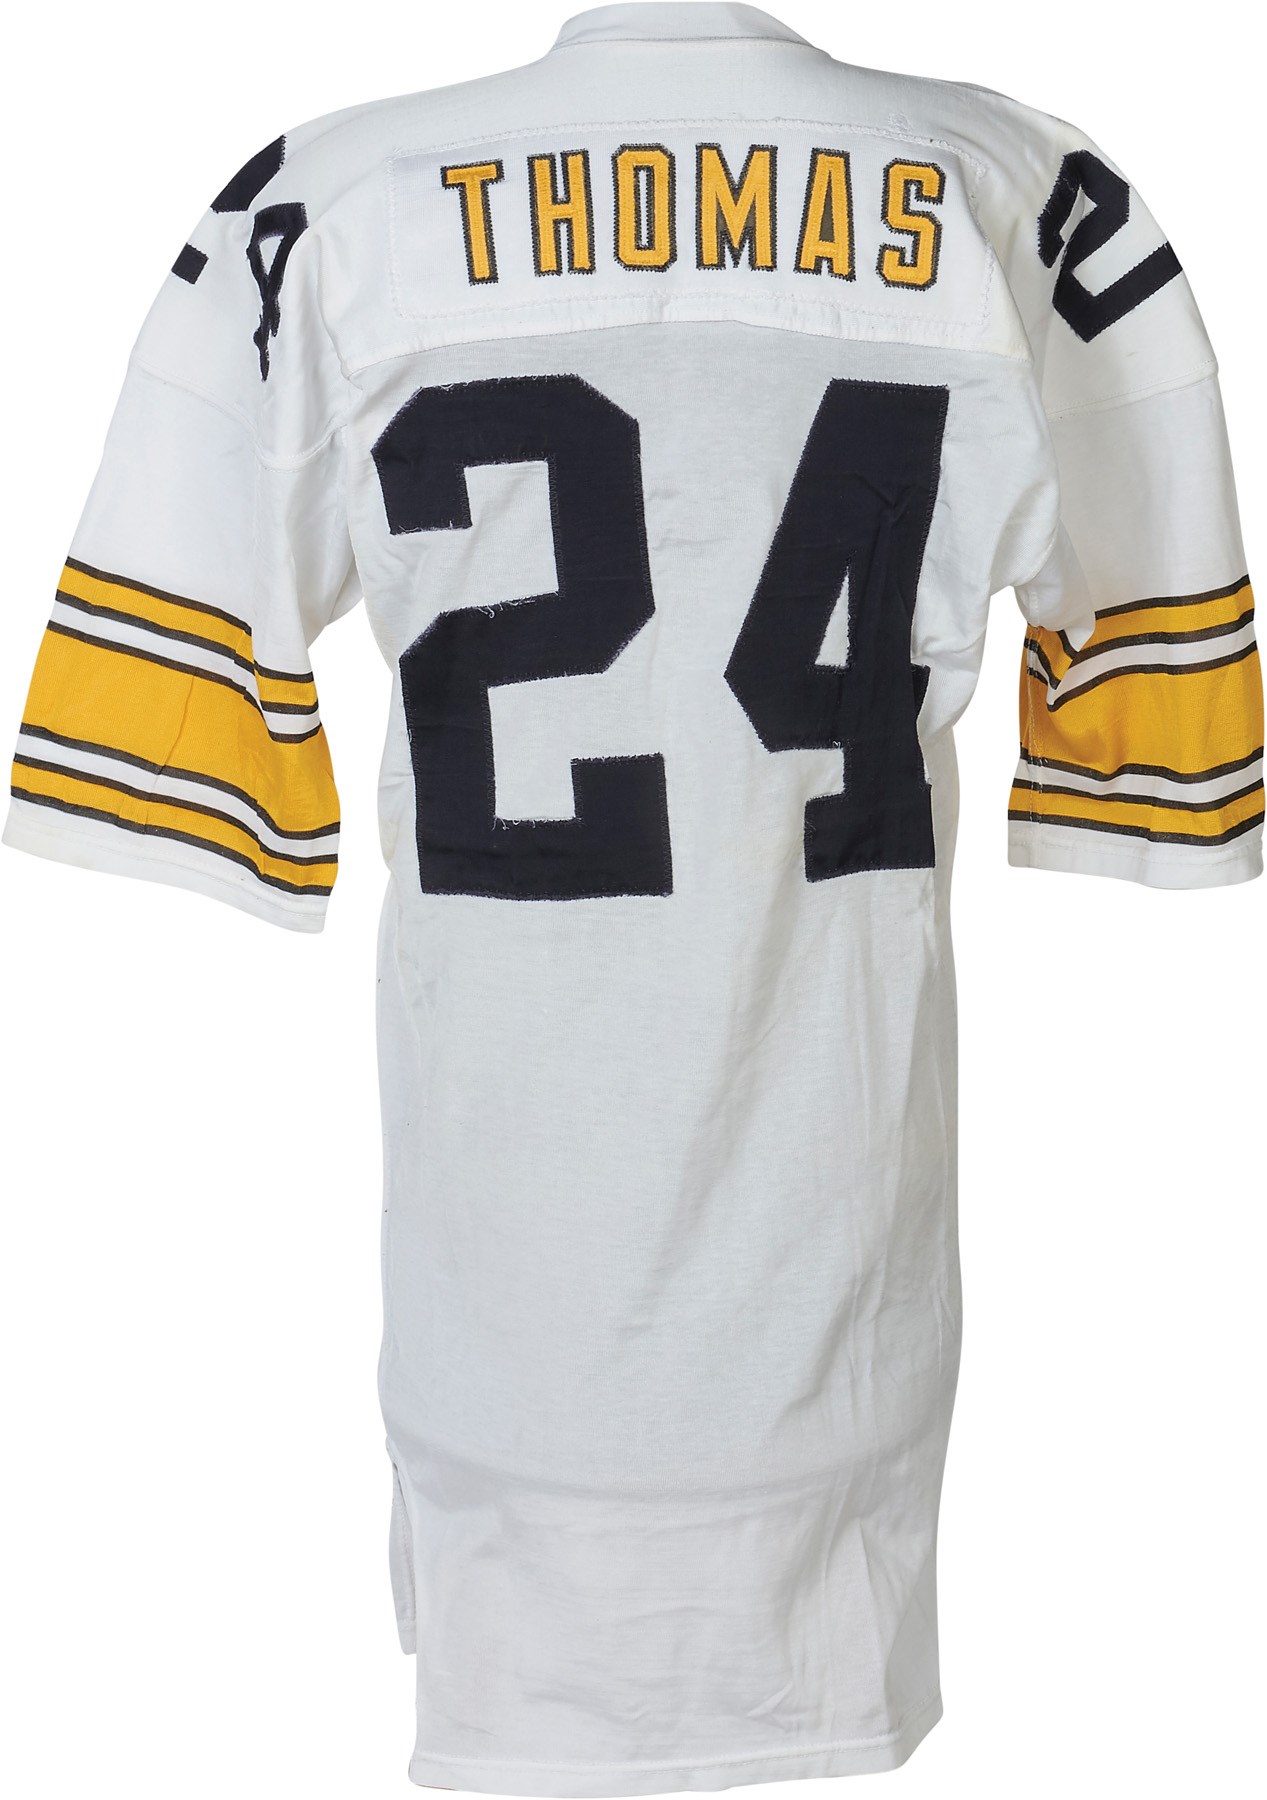 The Pittsburgh Steelers Game Worn Jersey Archive - 1976 J.T. Thomas Pittsburgh Steelers Game Worn Jersey